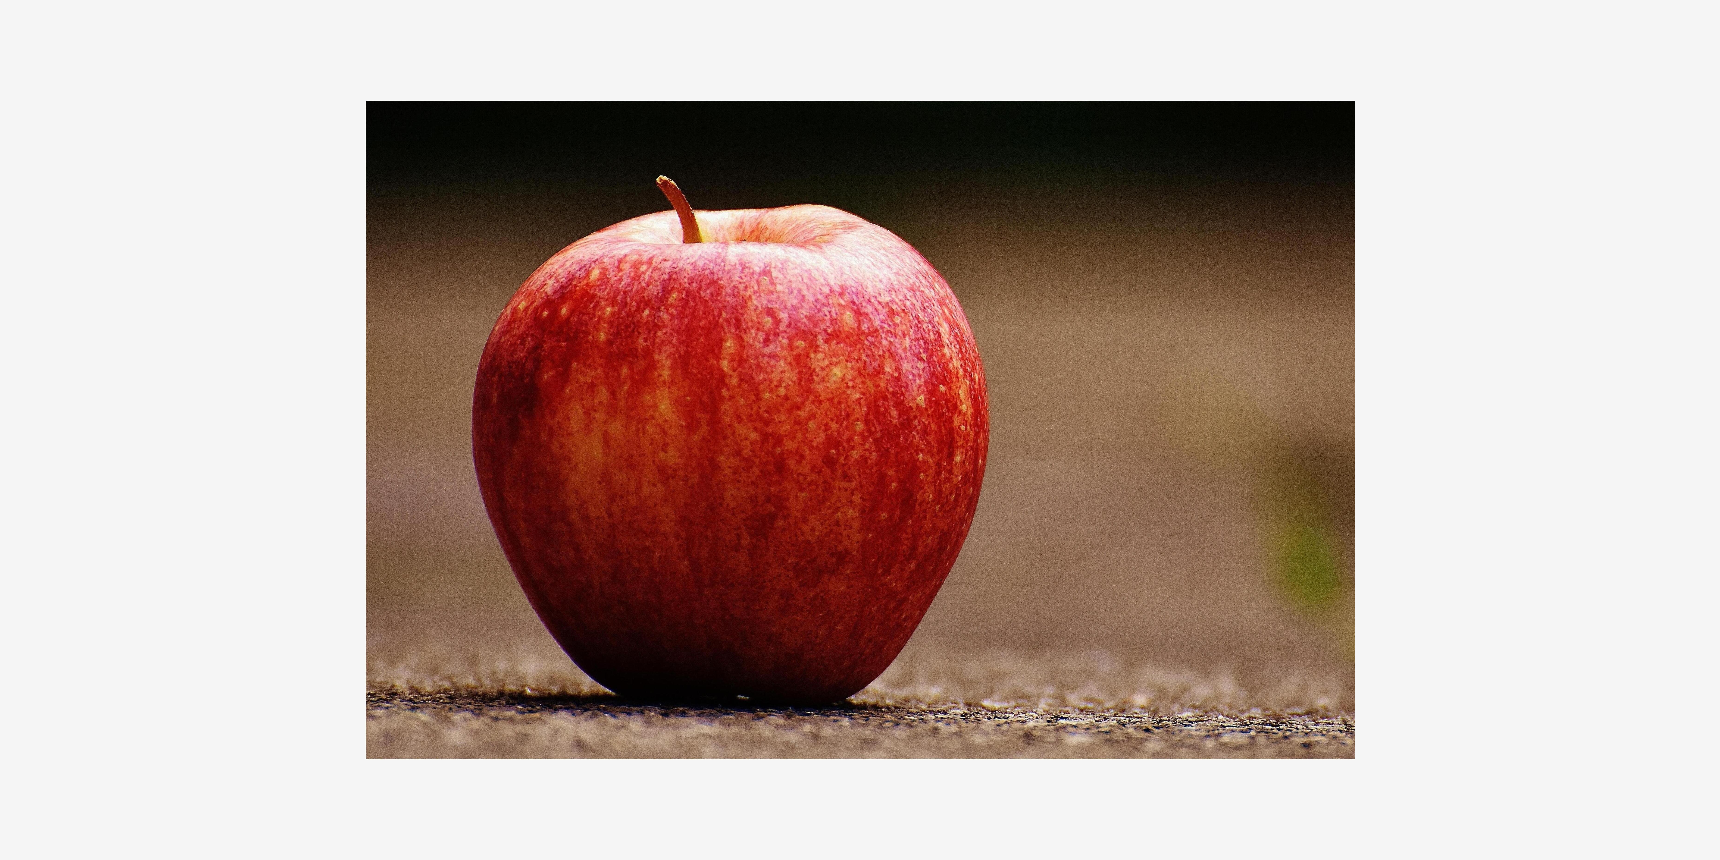 A close-up photograph of a red apple.